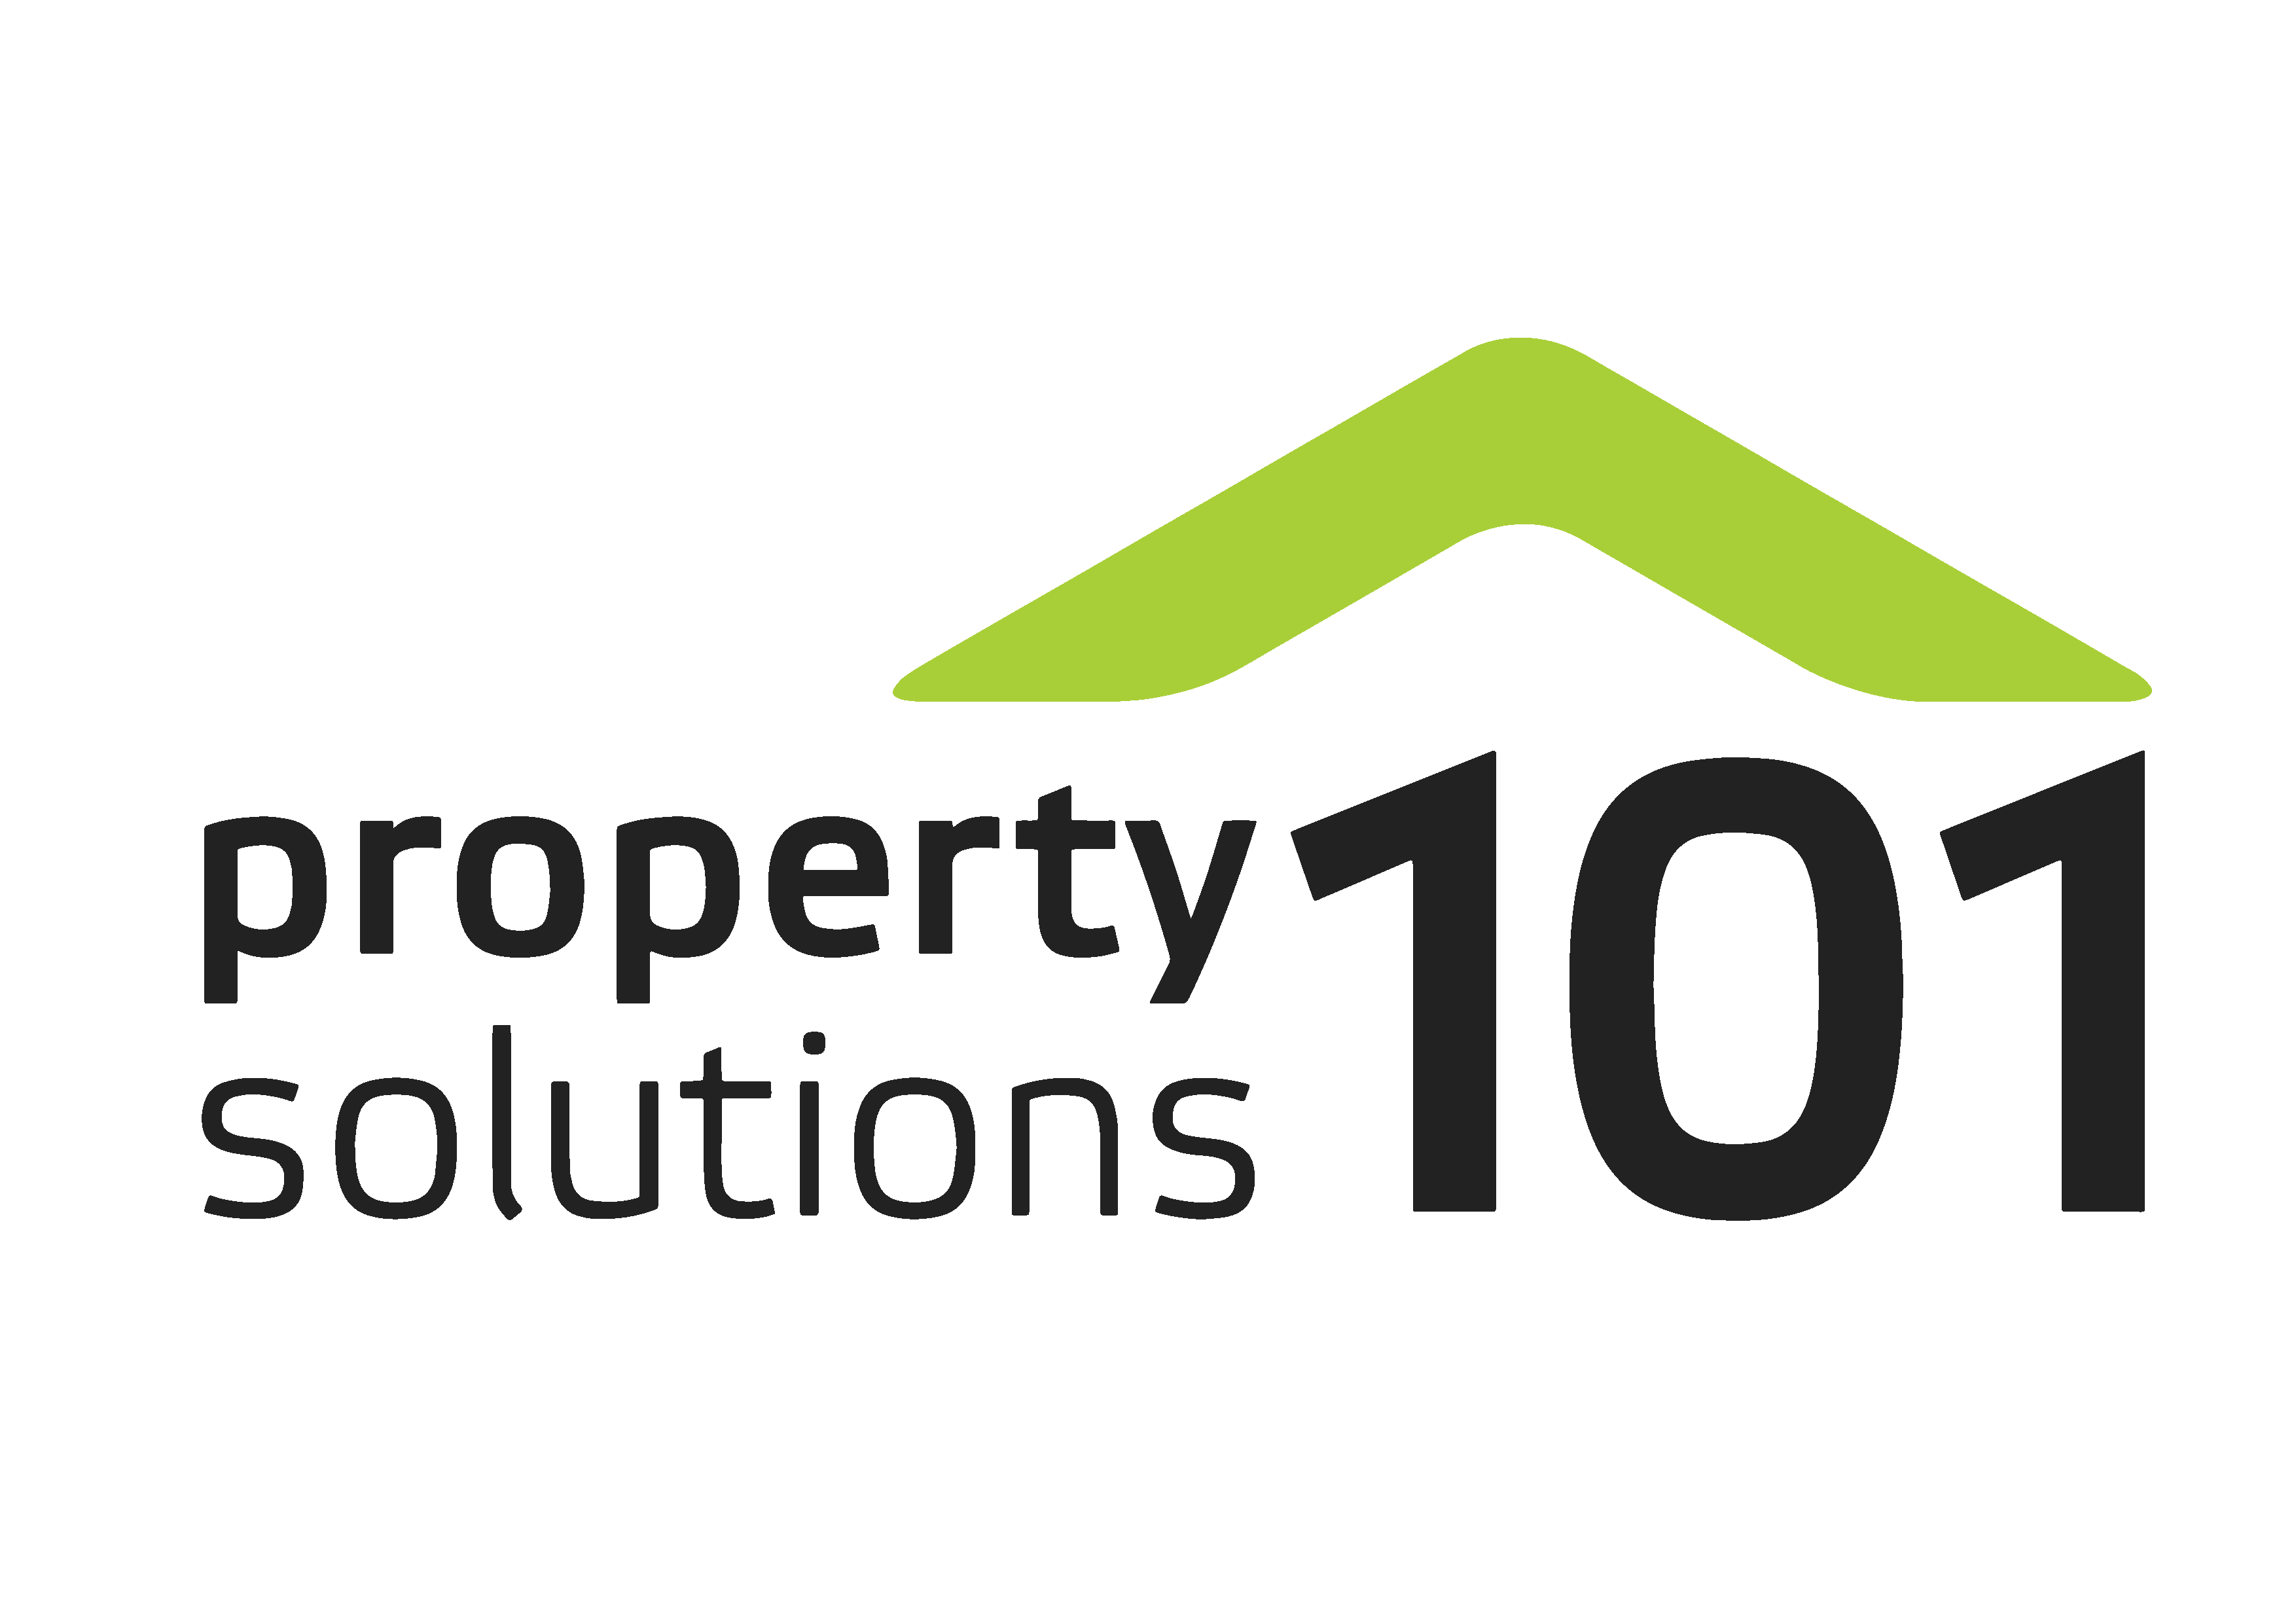 Property Solutions 101